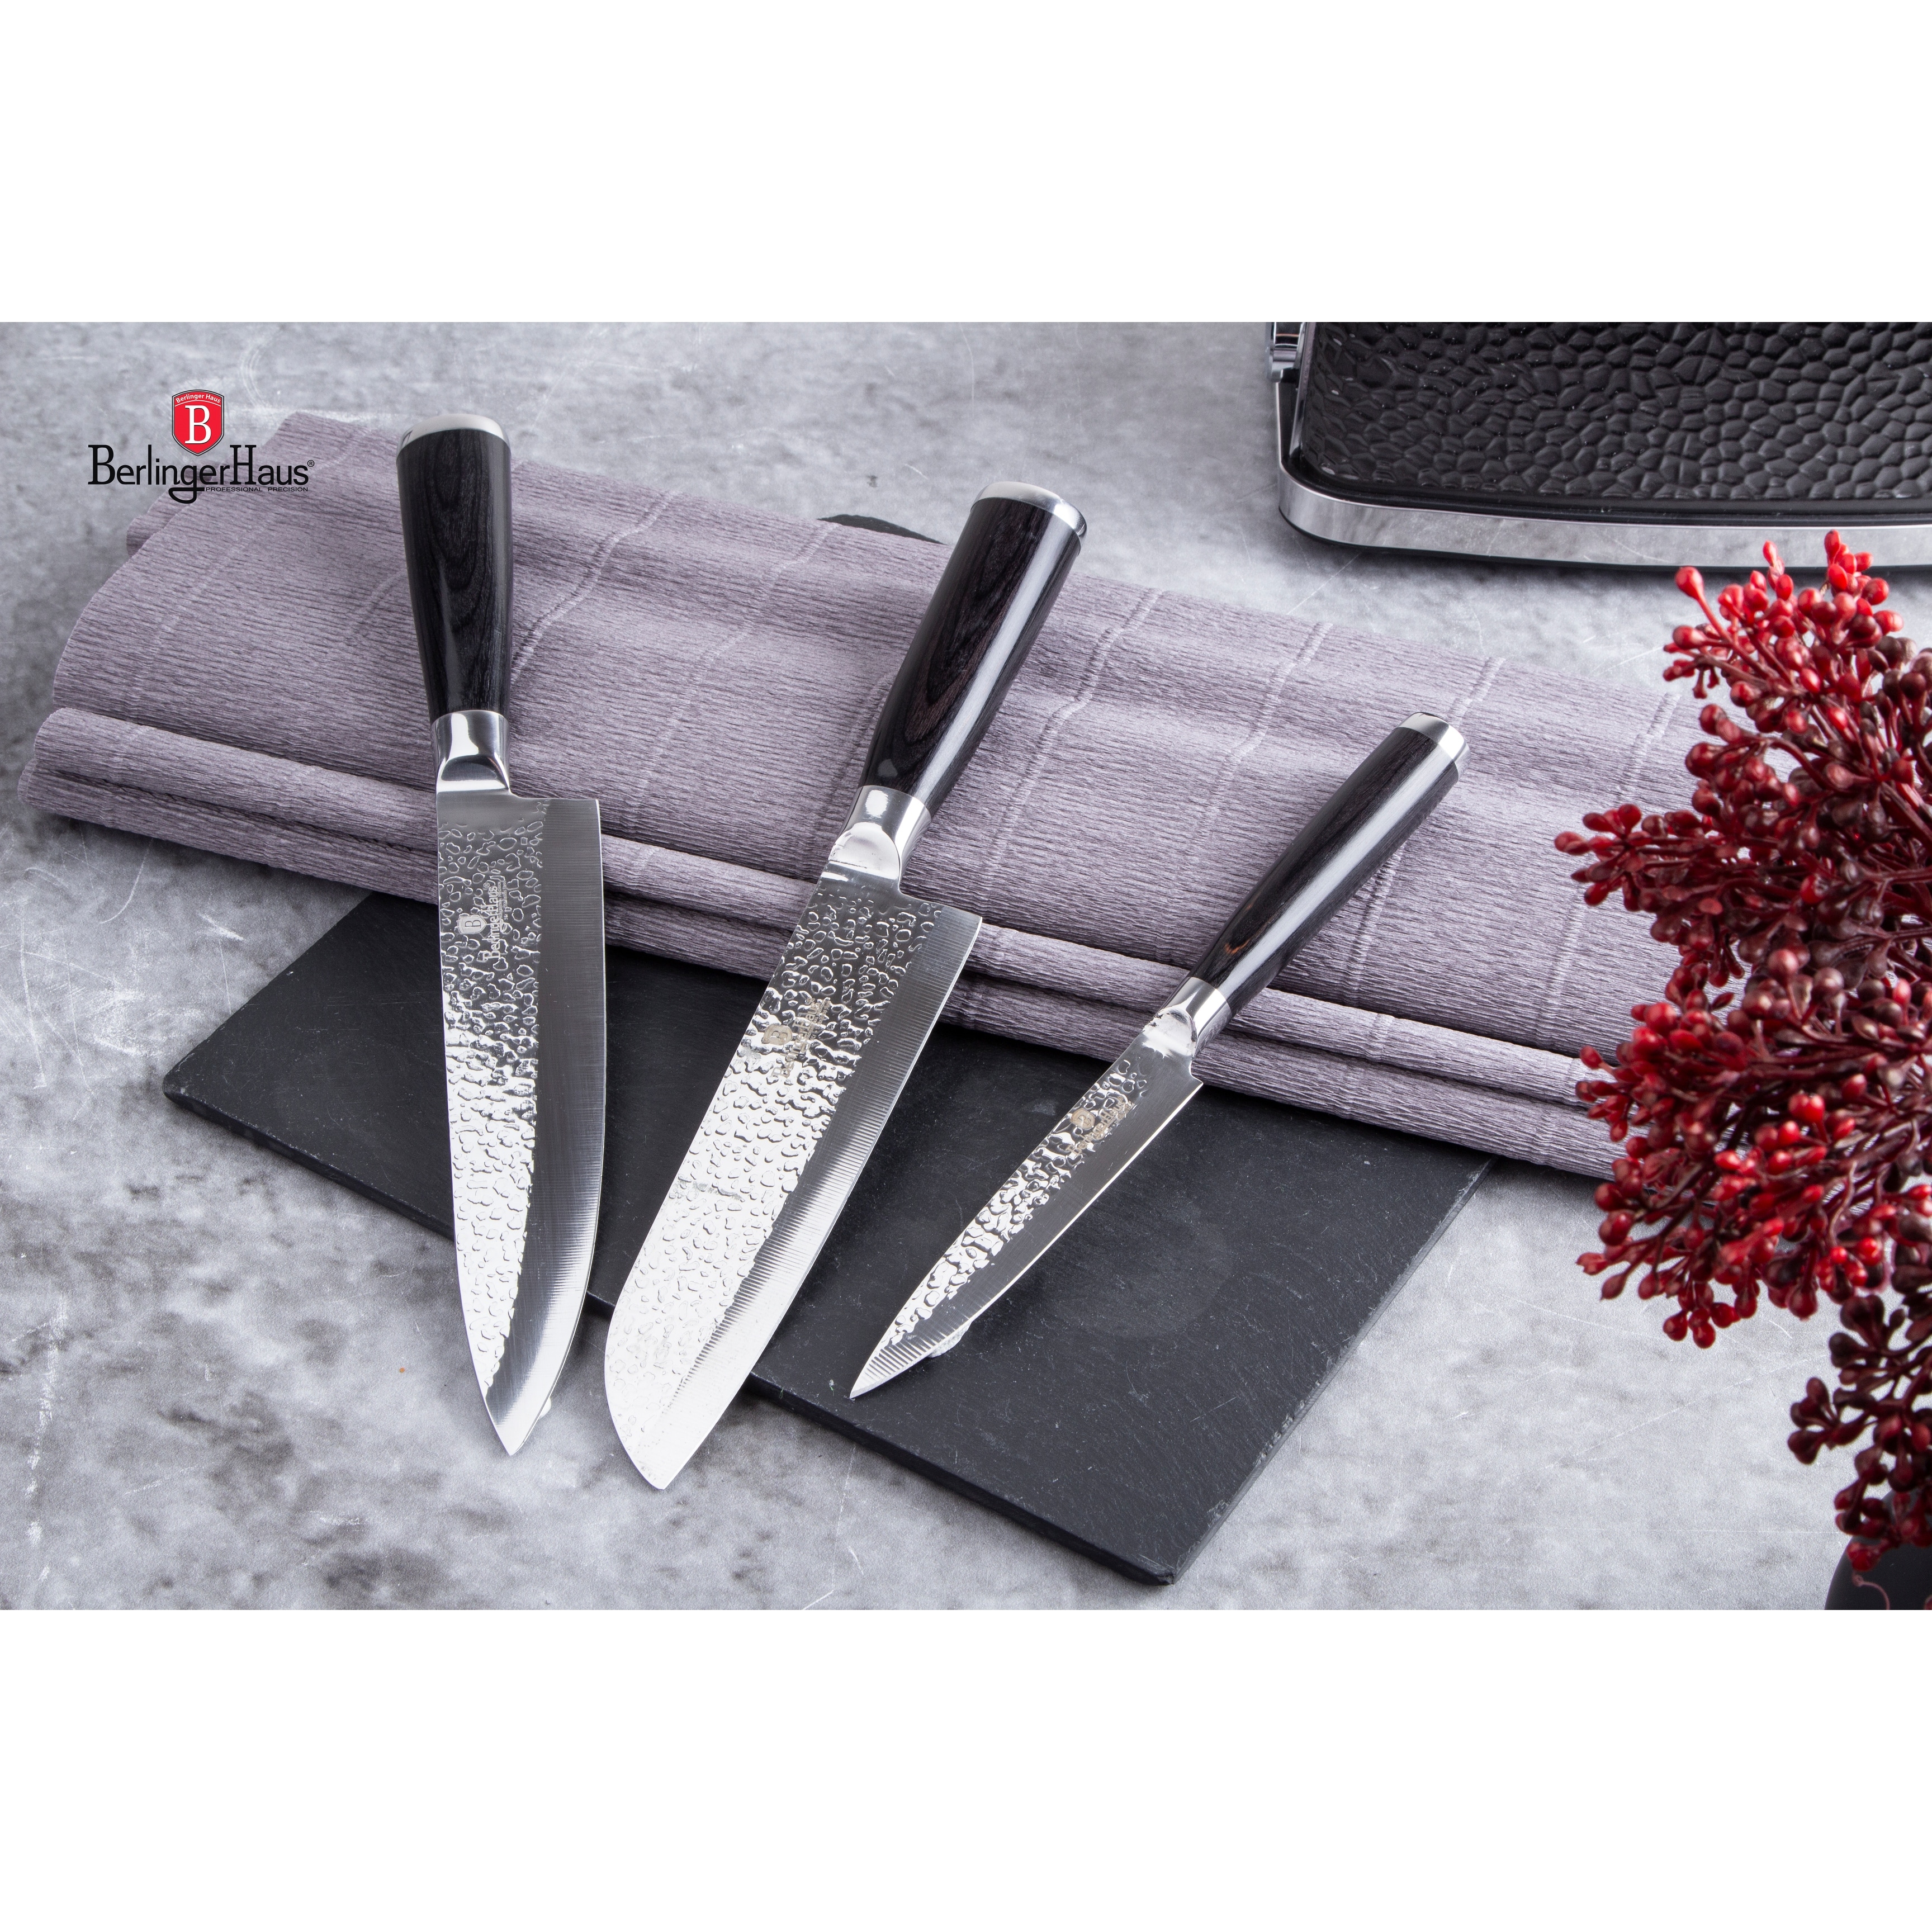 https://ak1.ostkcdn.com/images/products/is/images/direct/24c0daca77d8dbf257ac0ce9b95eb6f24357dded/Berlinger-Haus-3-Piece-Knife-Set-Primal-Gloss-Collection.jpg